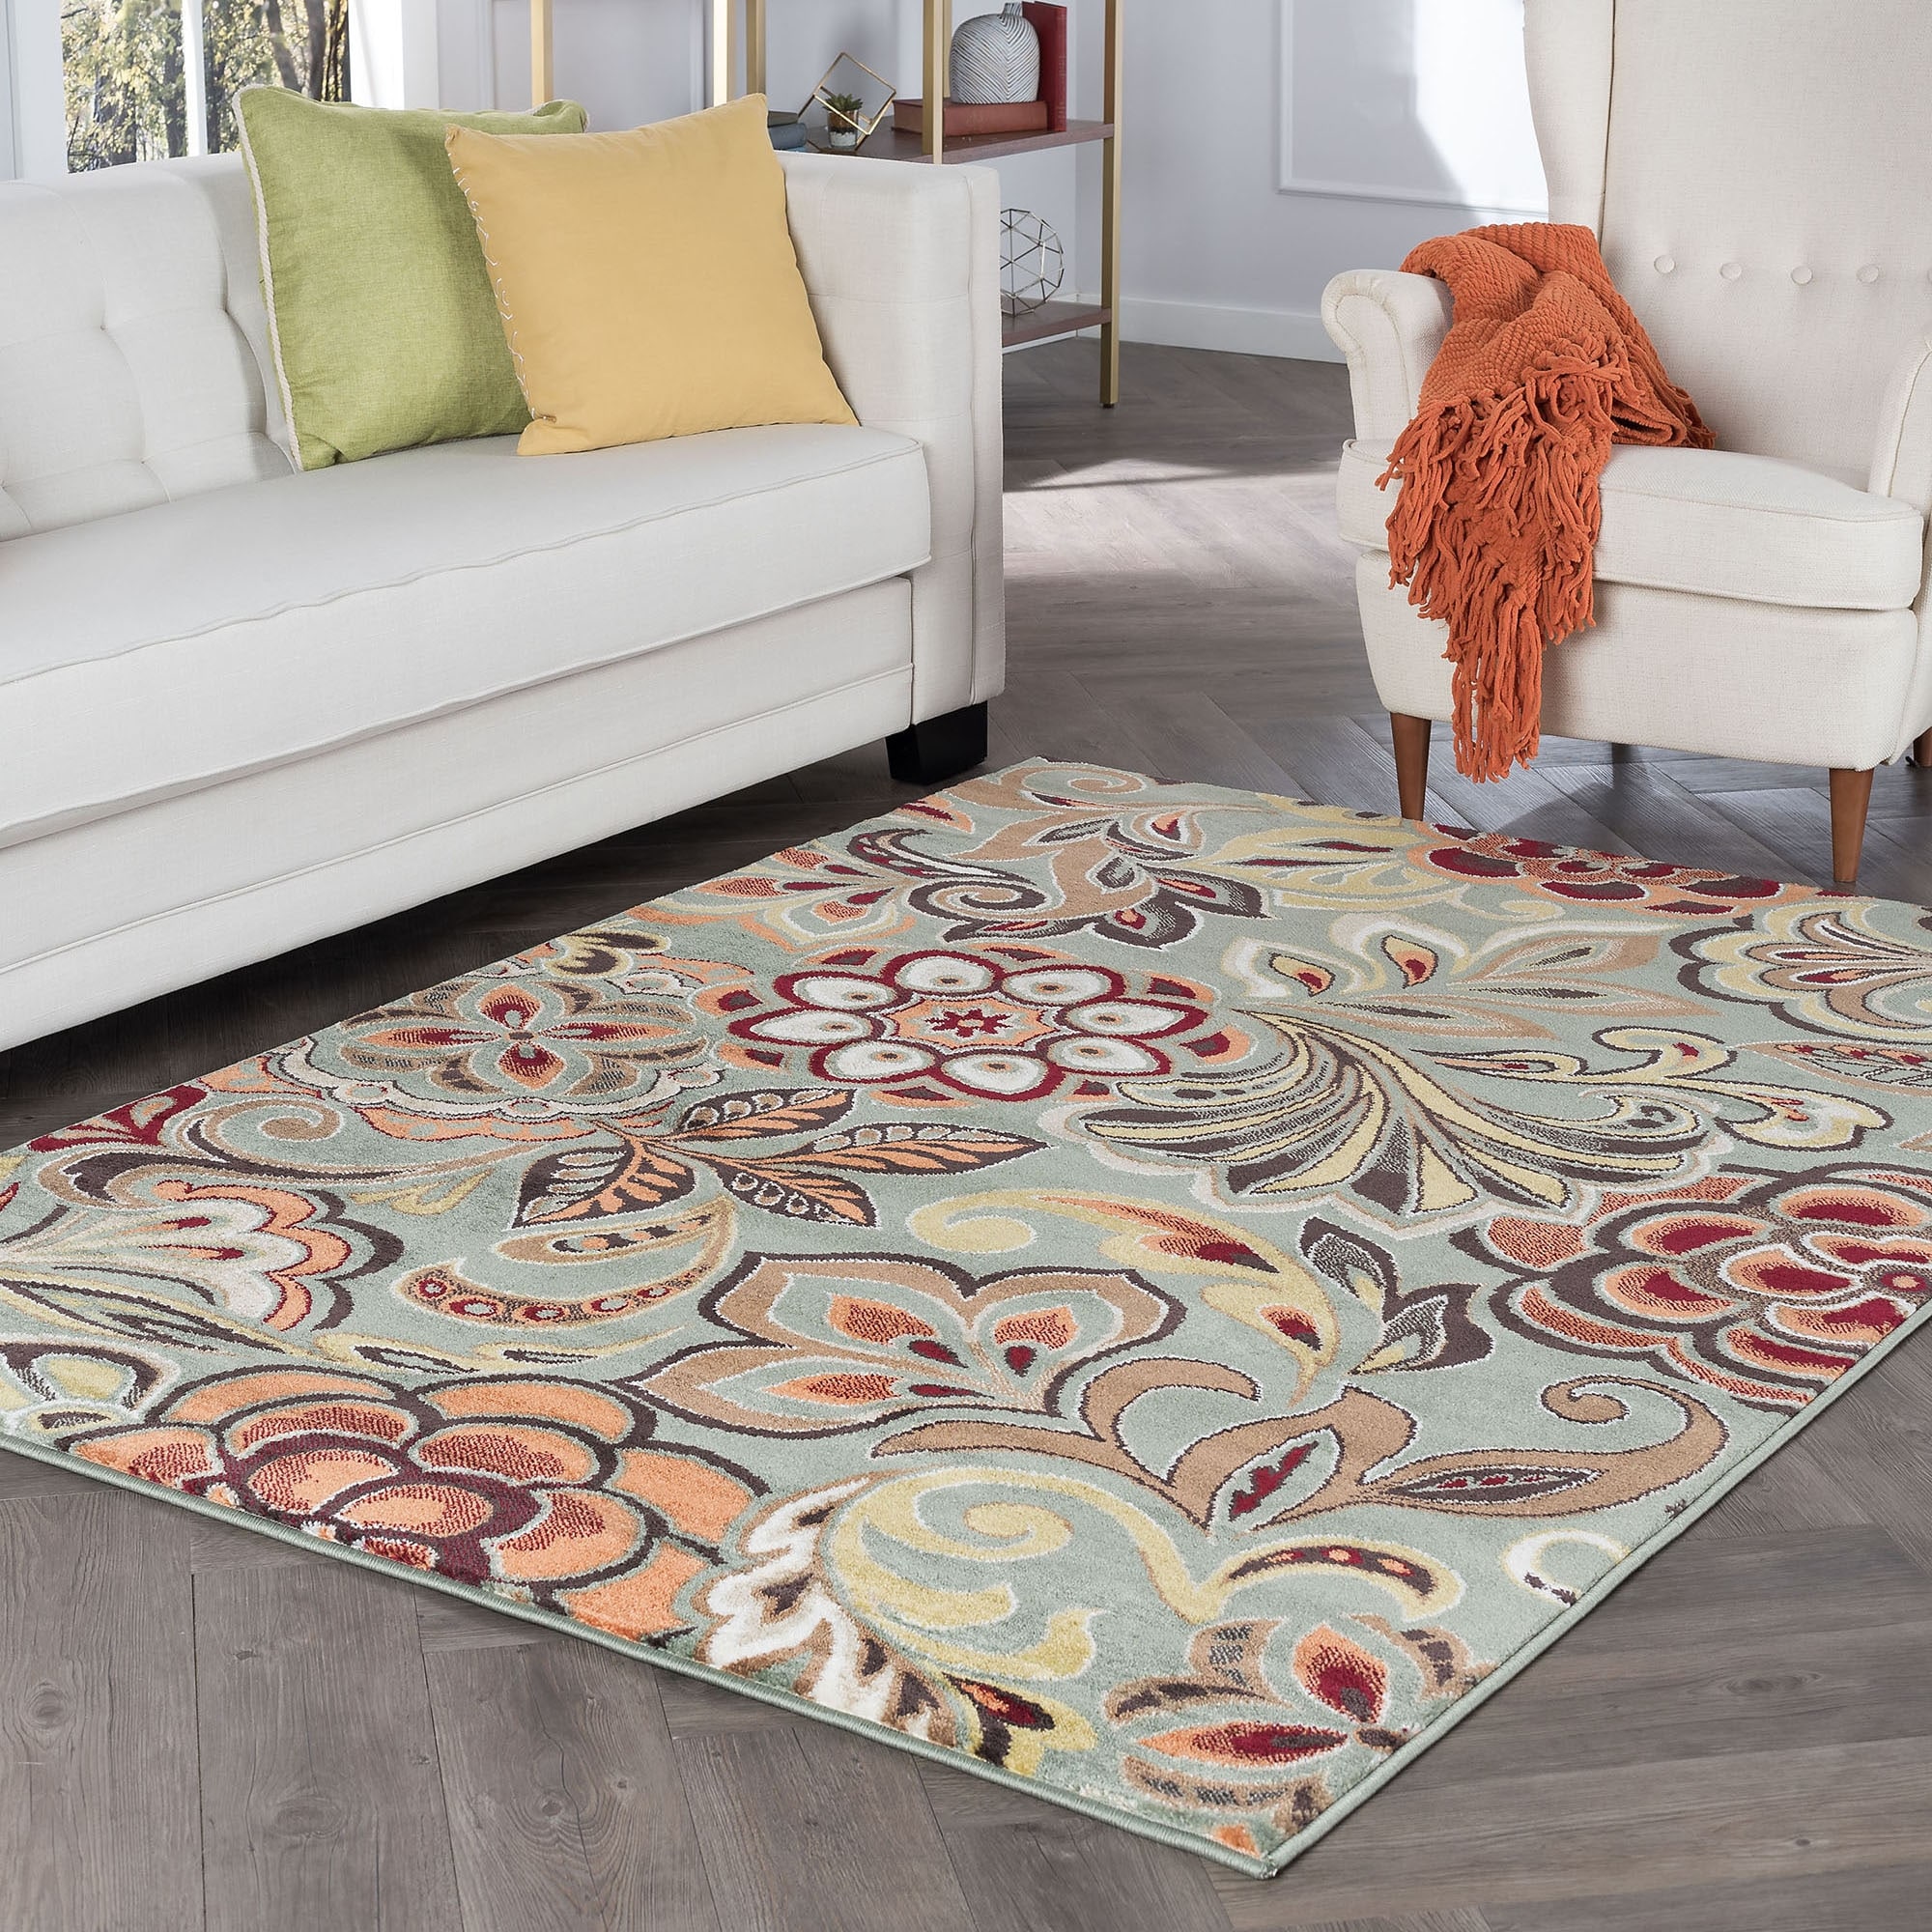 Bliss Rugs Homestead Novelty Area Rug, Size: 4' x 5', Multi-Color